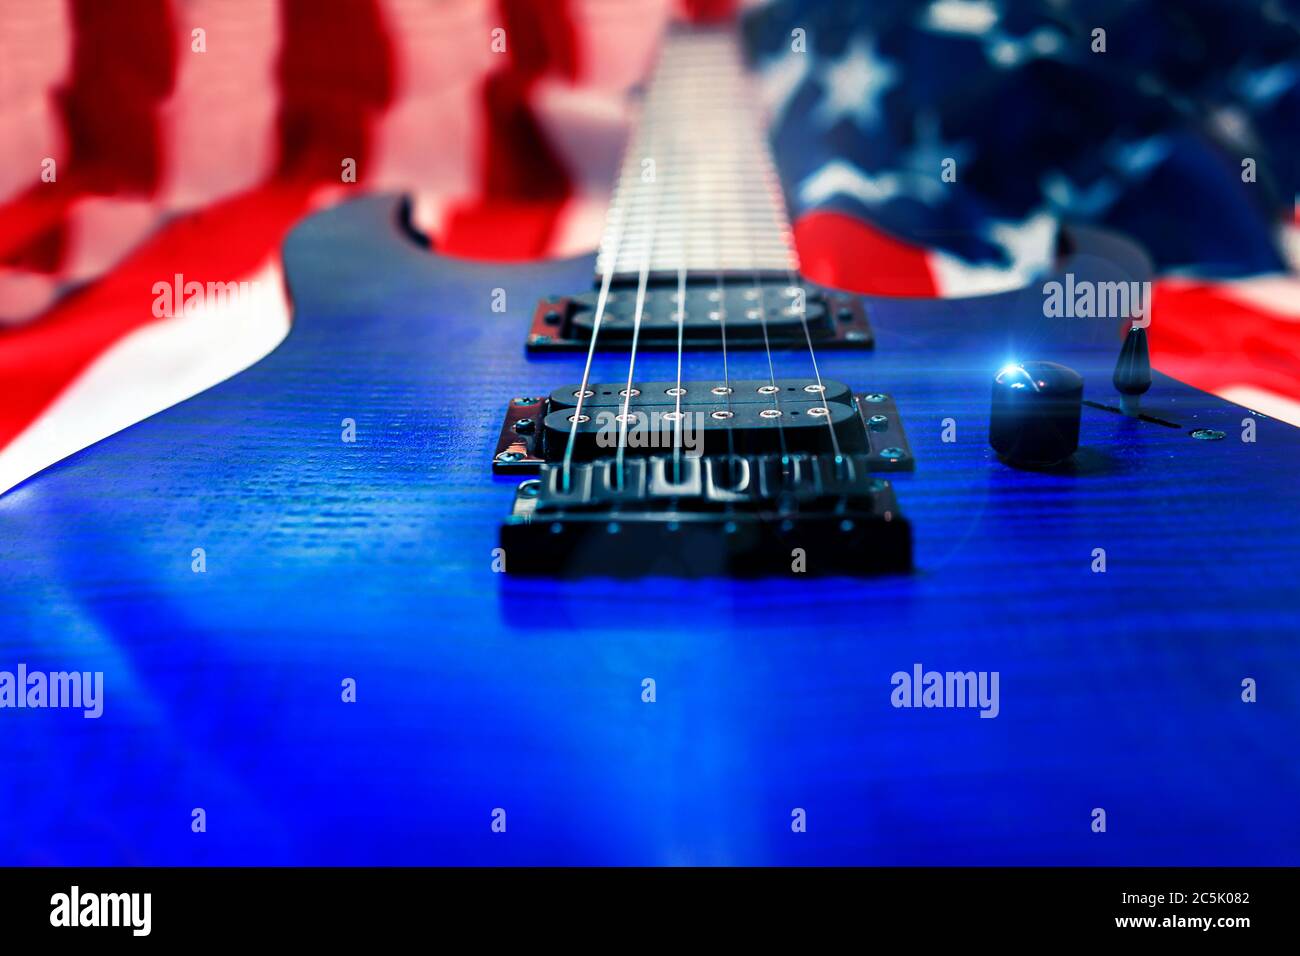 American Rock And Roll Music Concept With American Flag Electric Guitar Stock Photo